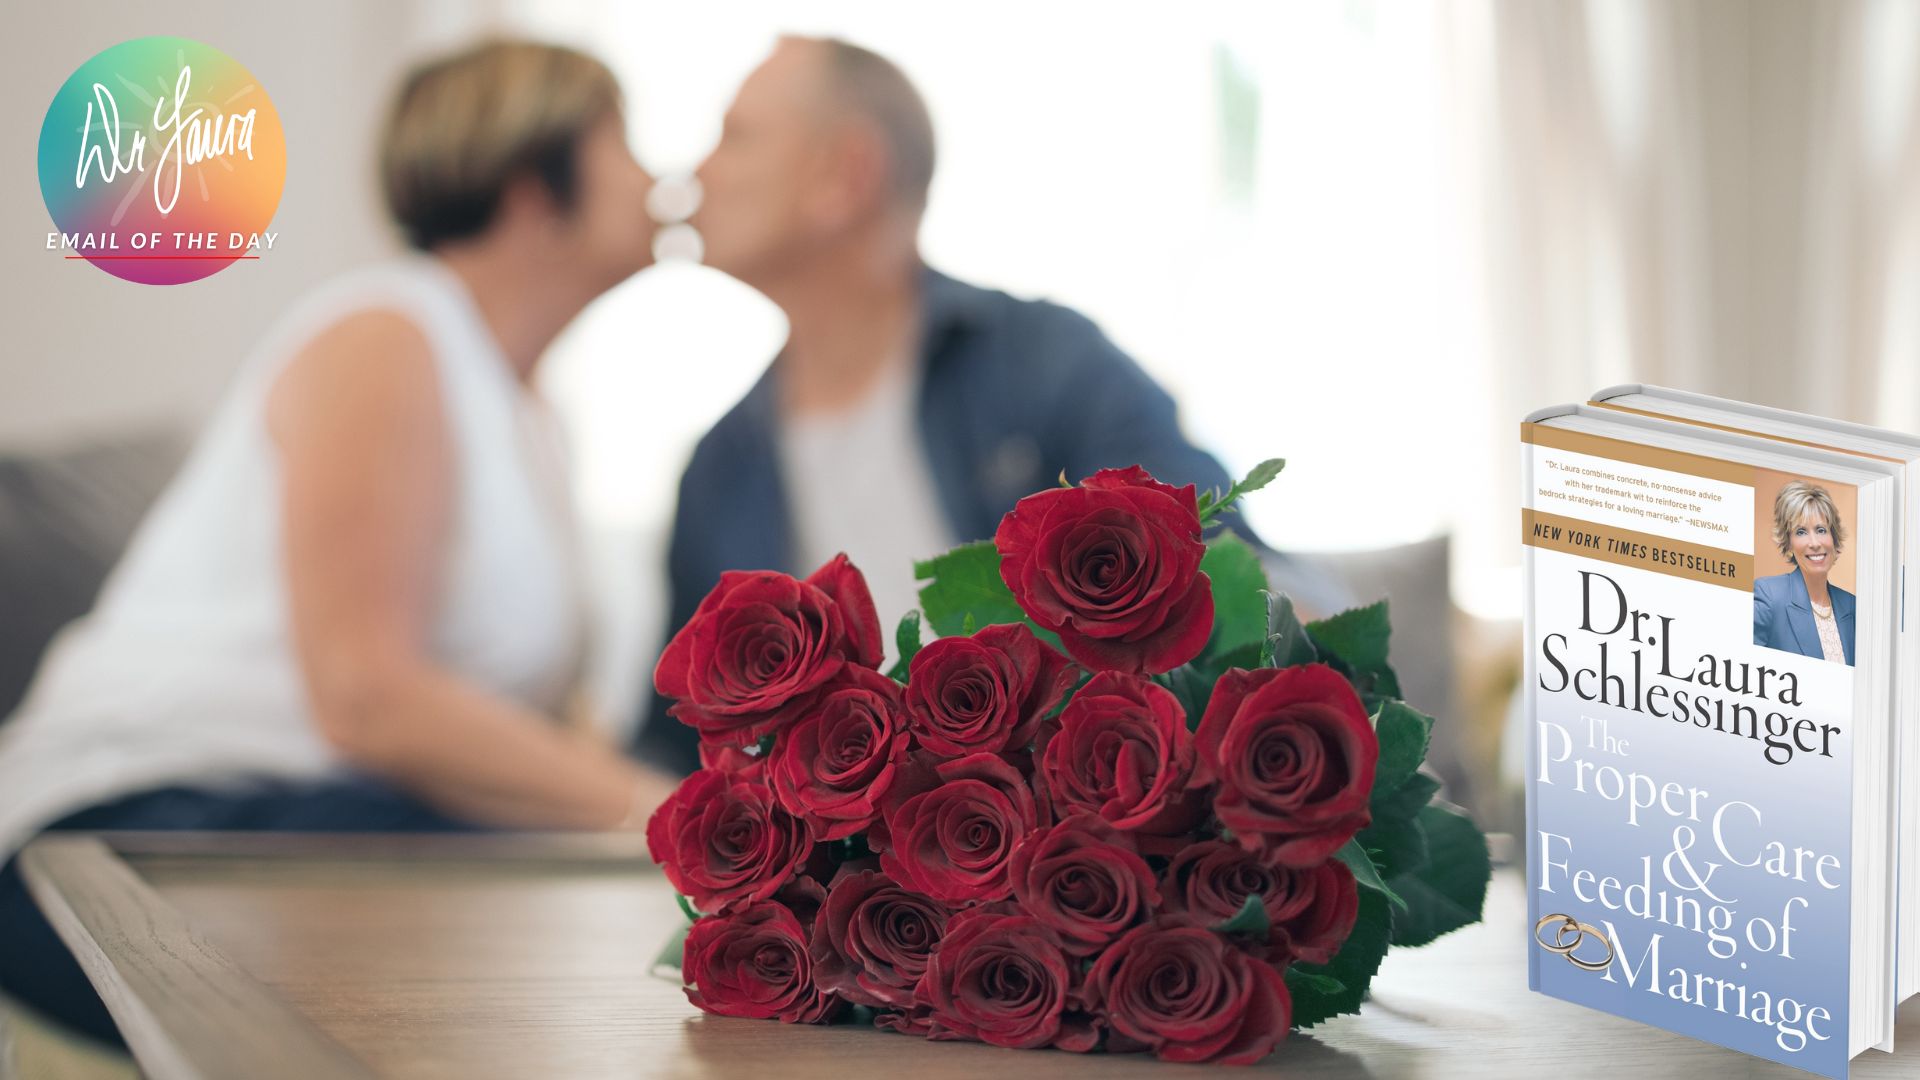 Email of the Day: Celebrating 13 Lucky Years of Marriage